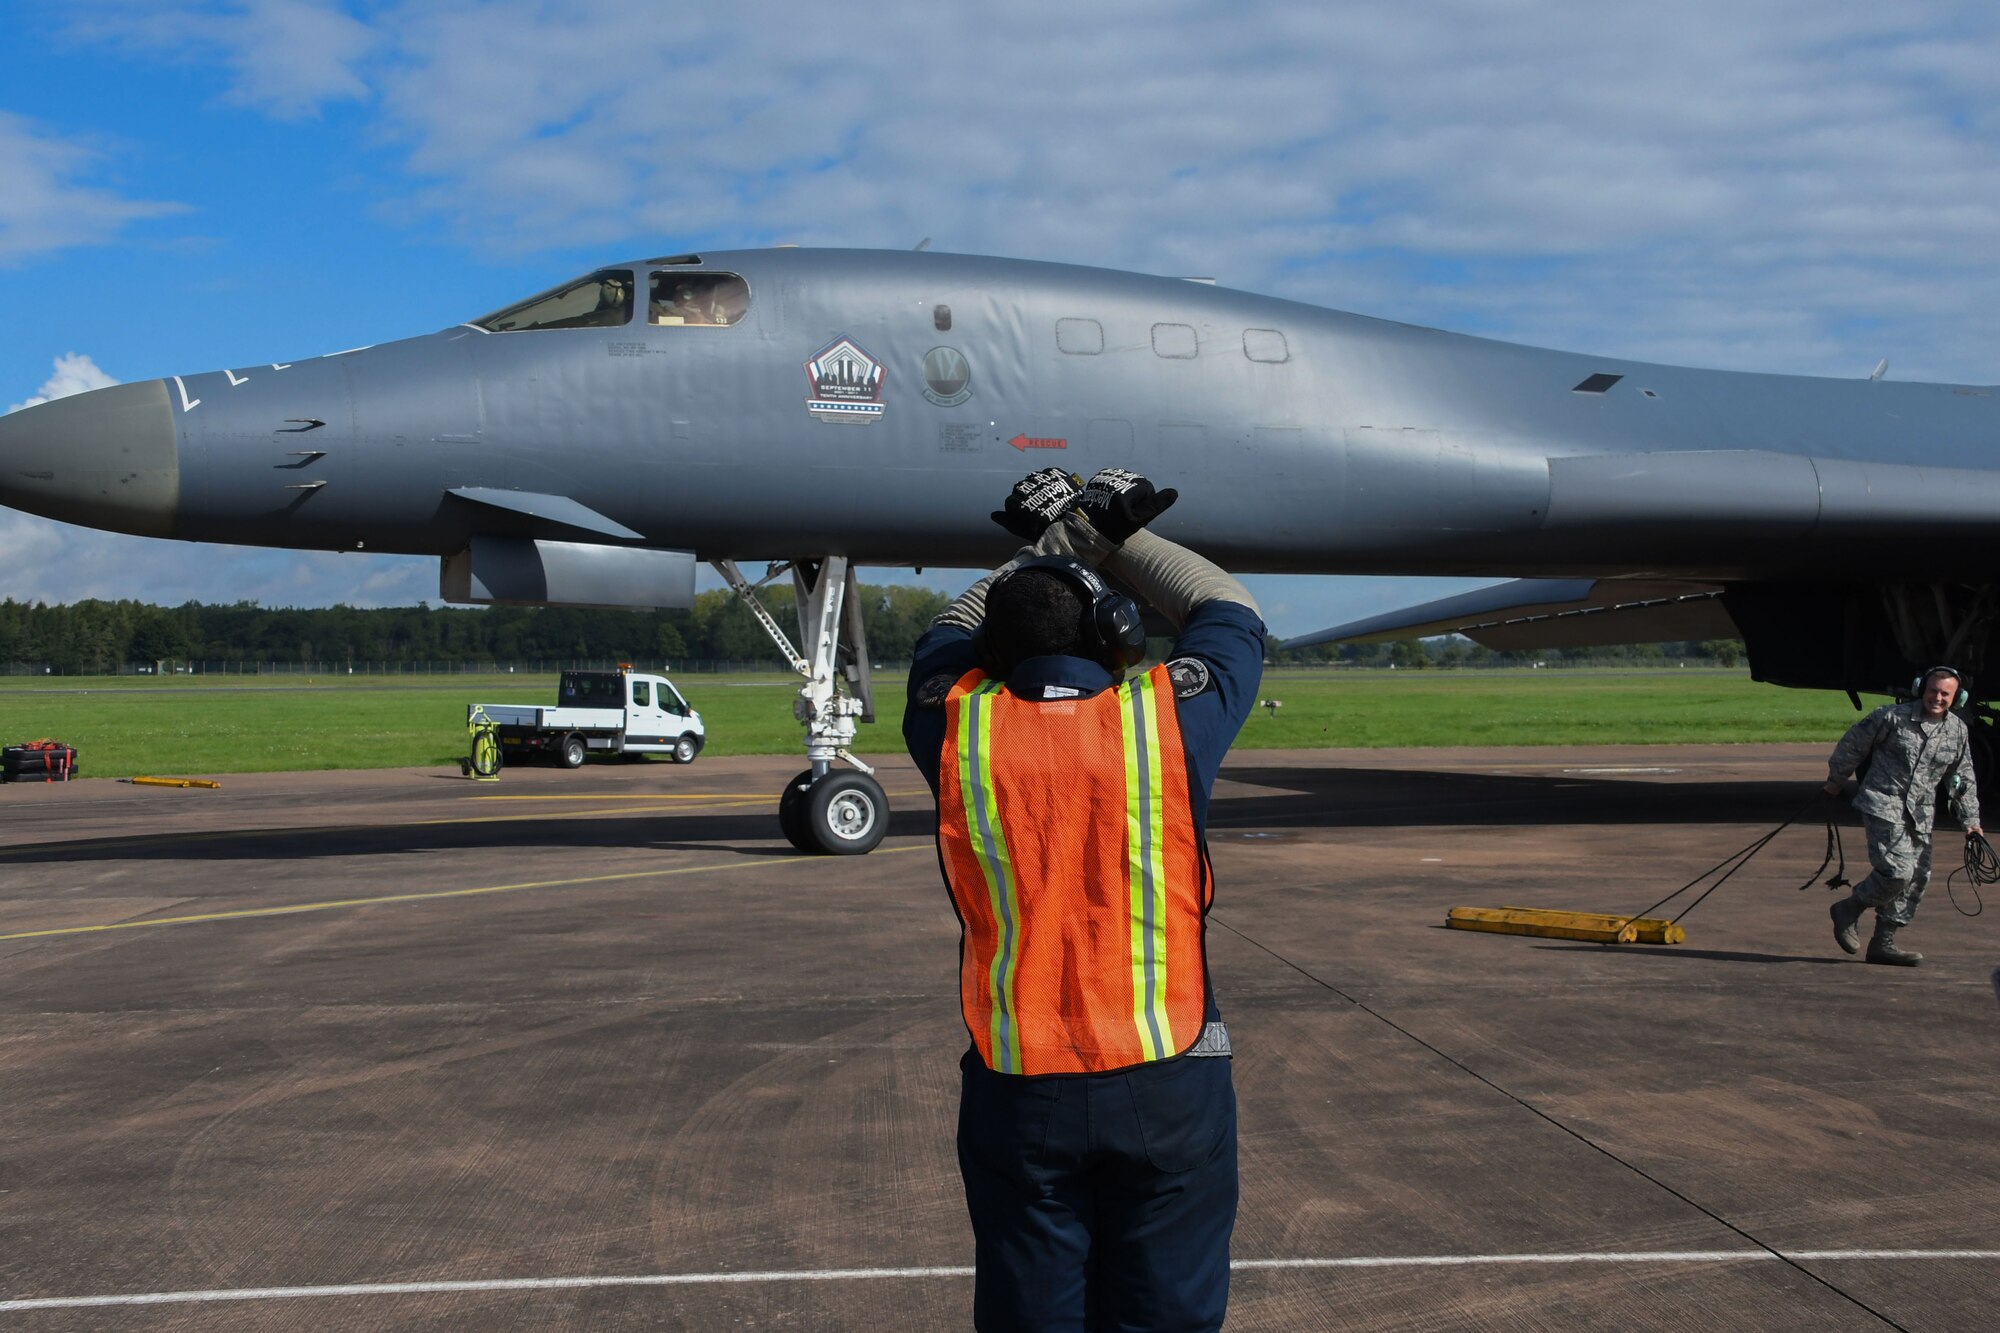 U.S. Air Force Staff Sgt. Ryan Branch, a 489th Bomb Group crew chief, signals pilots while Tech. Sgt. Bret Reeves, 489th BG crew chief, removes the chocks from a B-1 Lancer at RAF Fairford, U.K., Aug. 31, 2017.